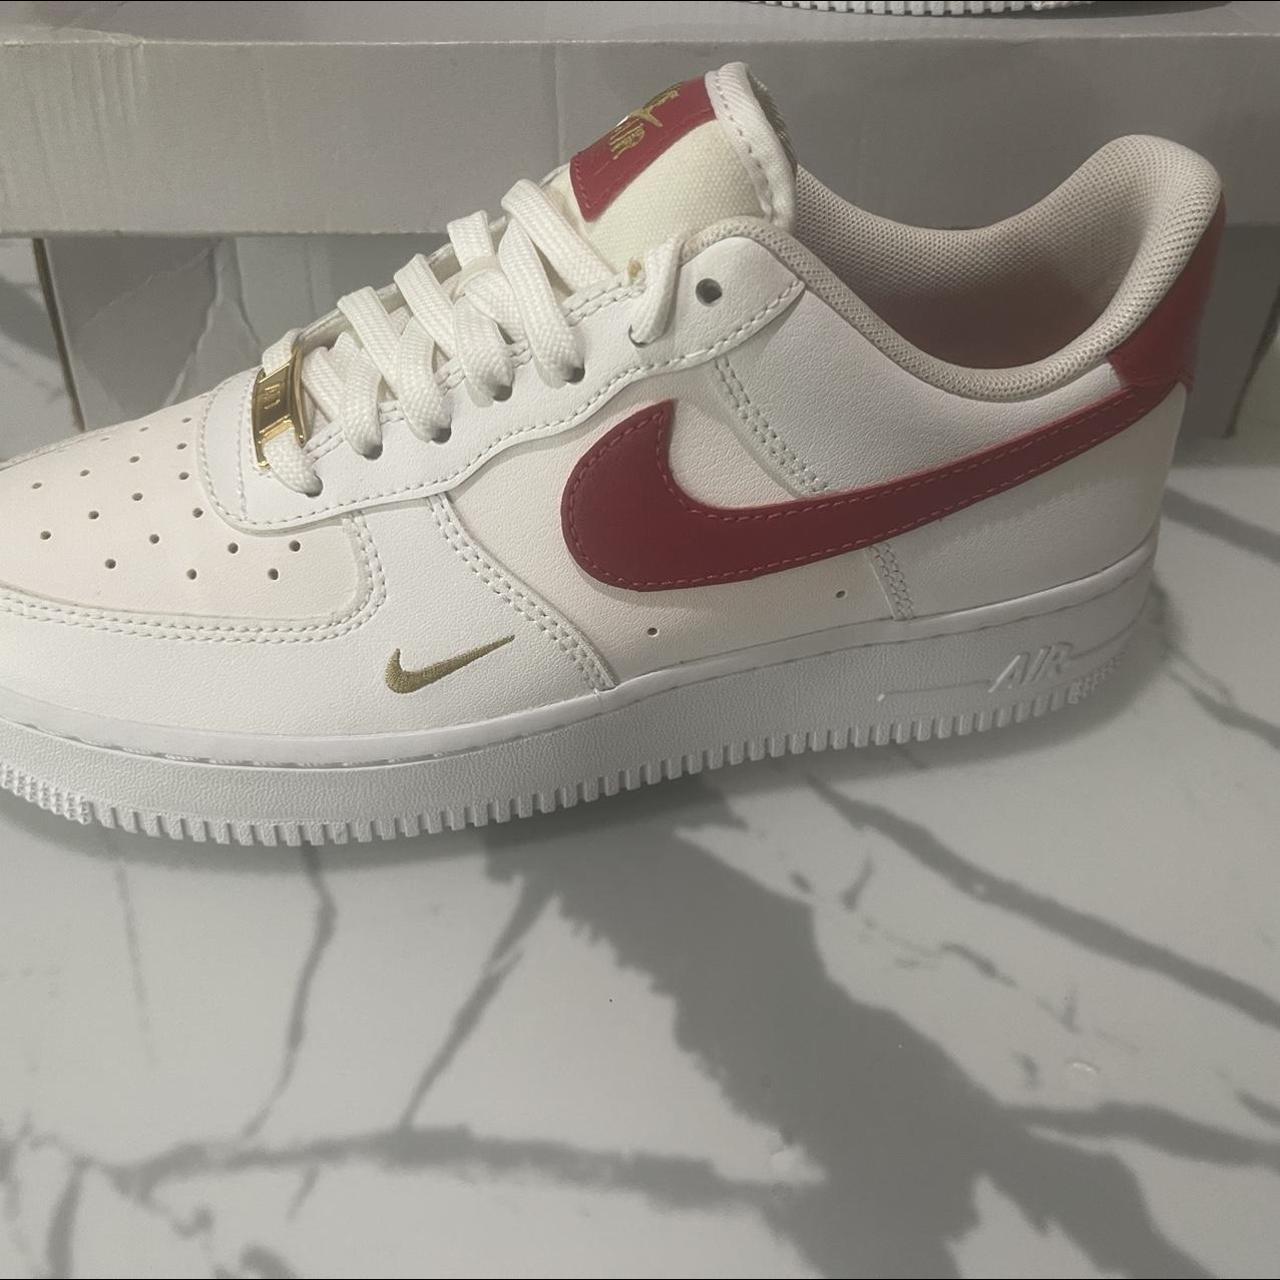 NIKE AIR FORCE 1 '07 WHITE GYM RED price €89.00